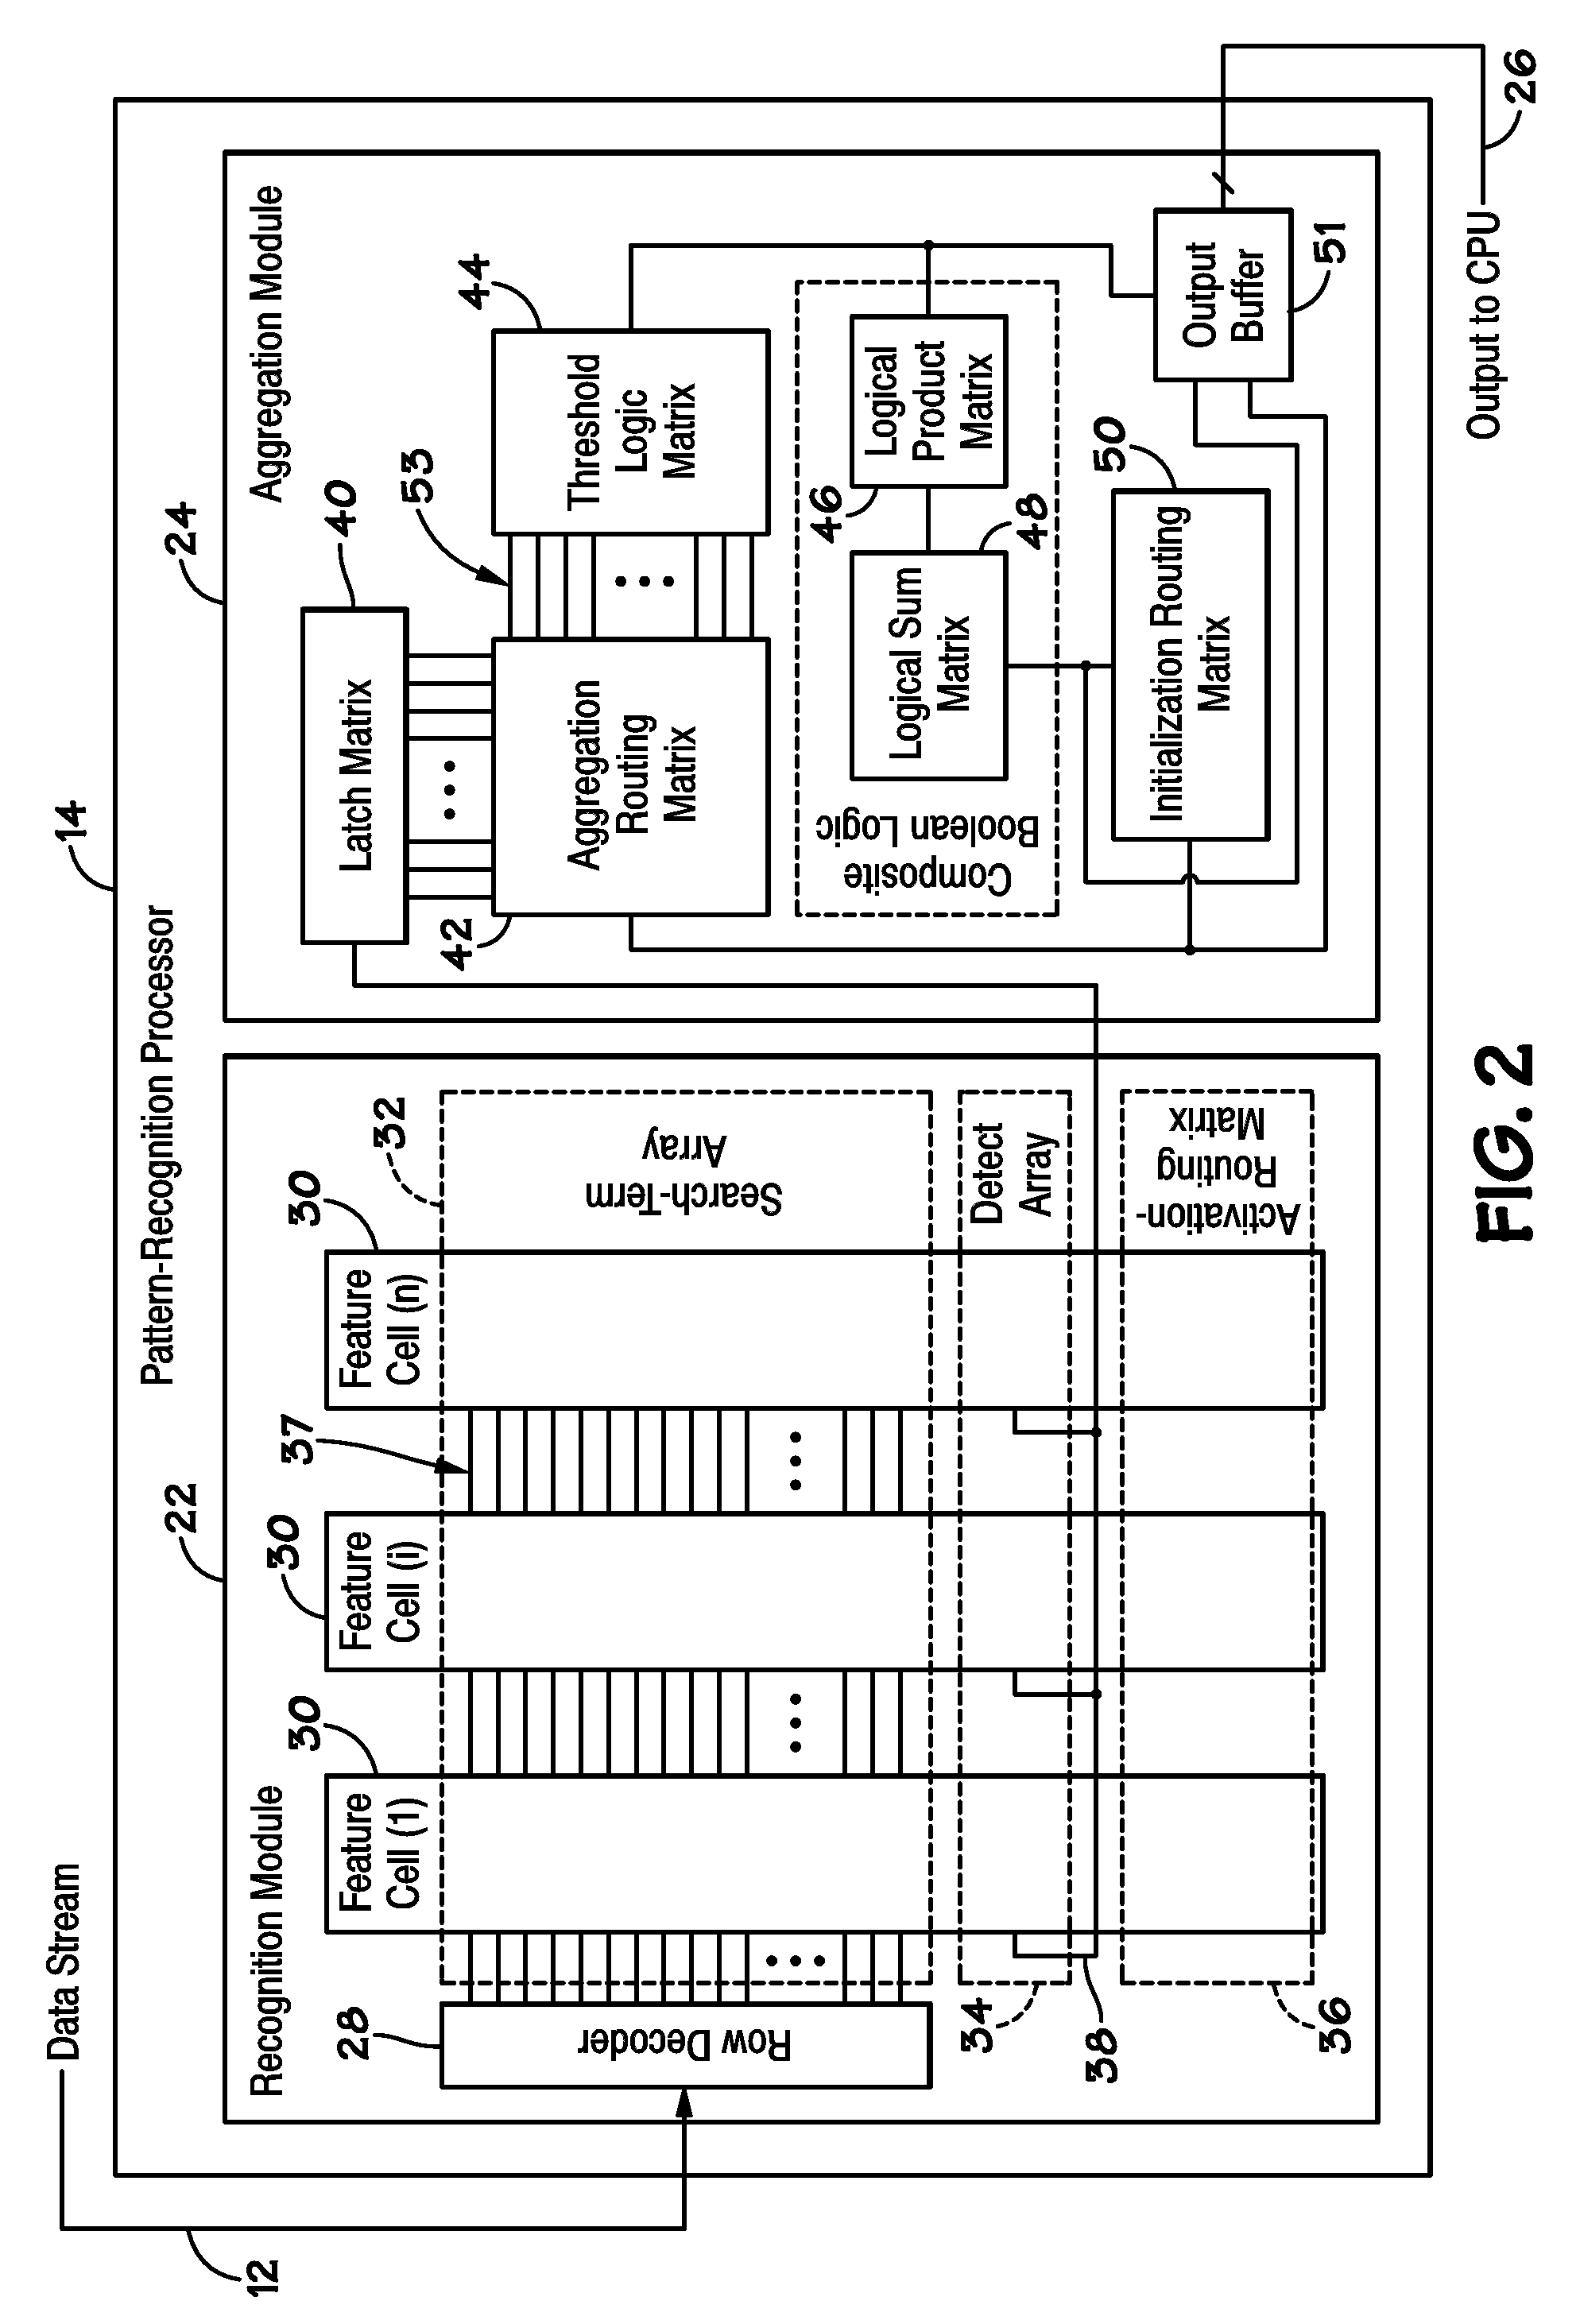 Systems and Methods for Managing Endian Mode of a Device